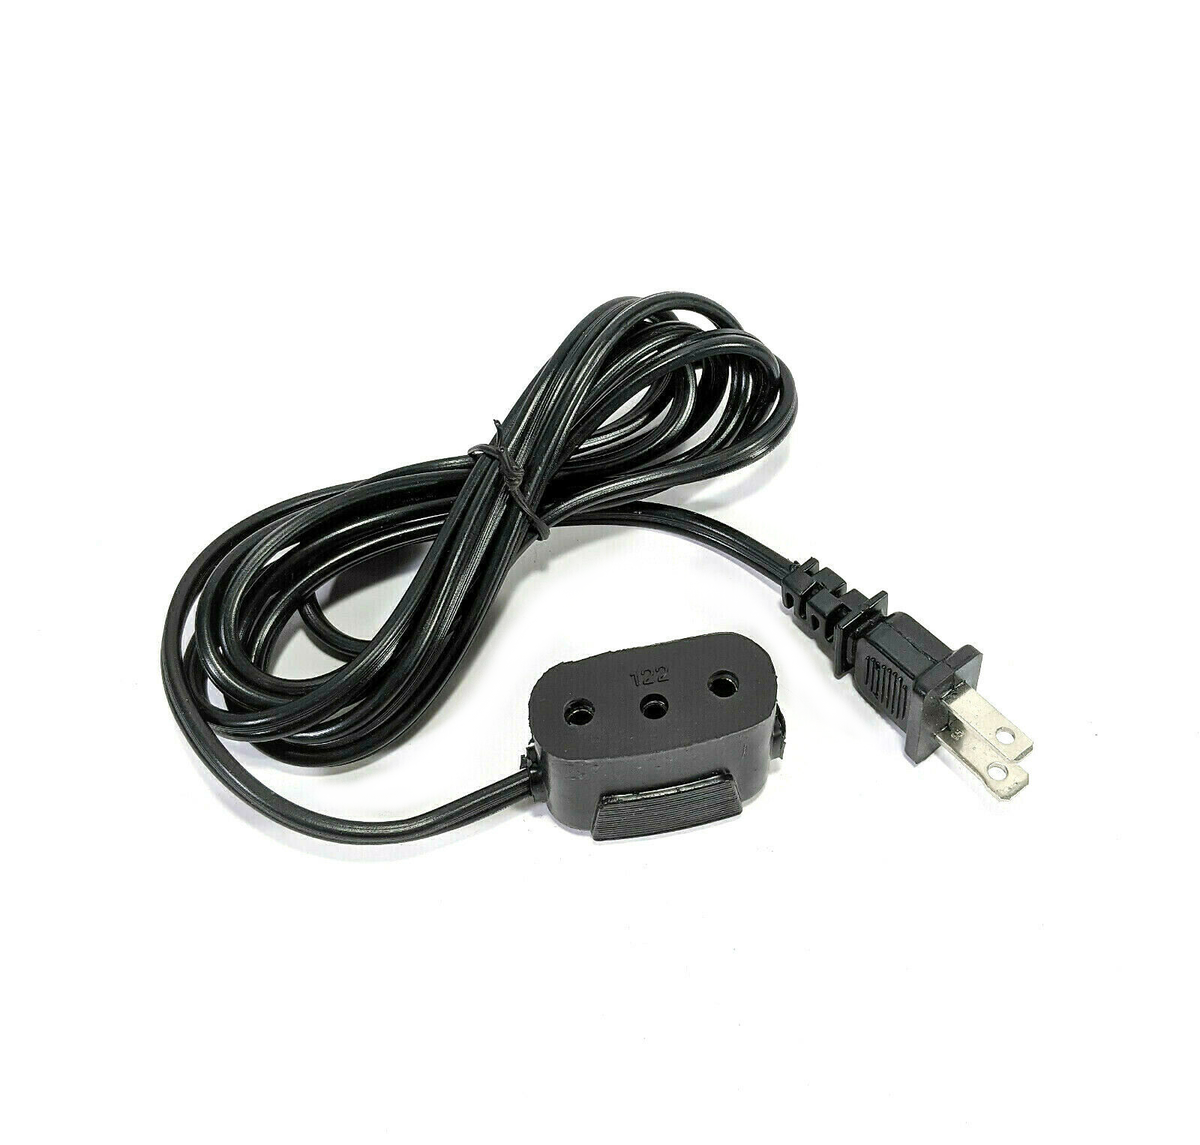 NEW SINGER 15 66 201 401 403 404 301 SEWING MACHINE 2 OR 3 PIN POWER CORD  PLUG